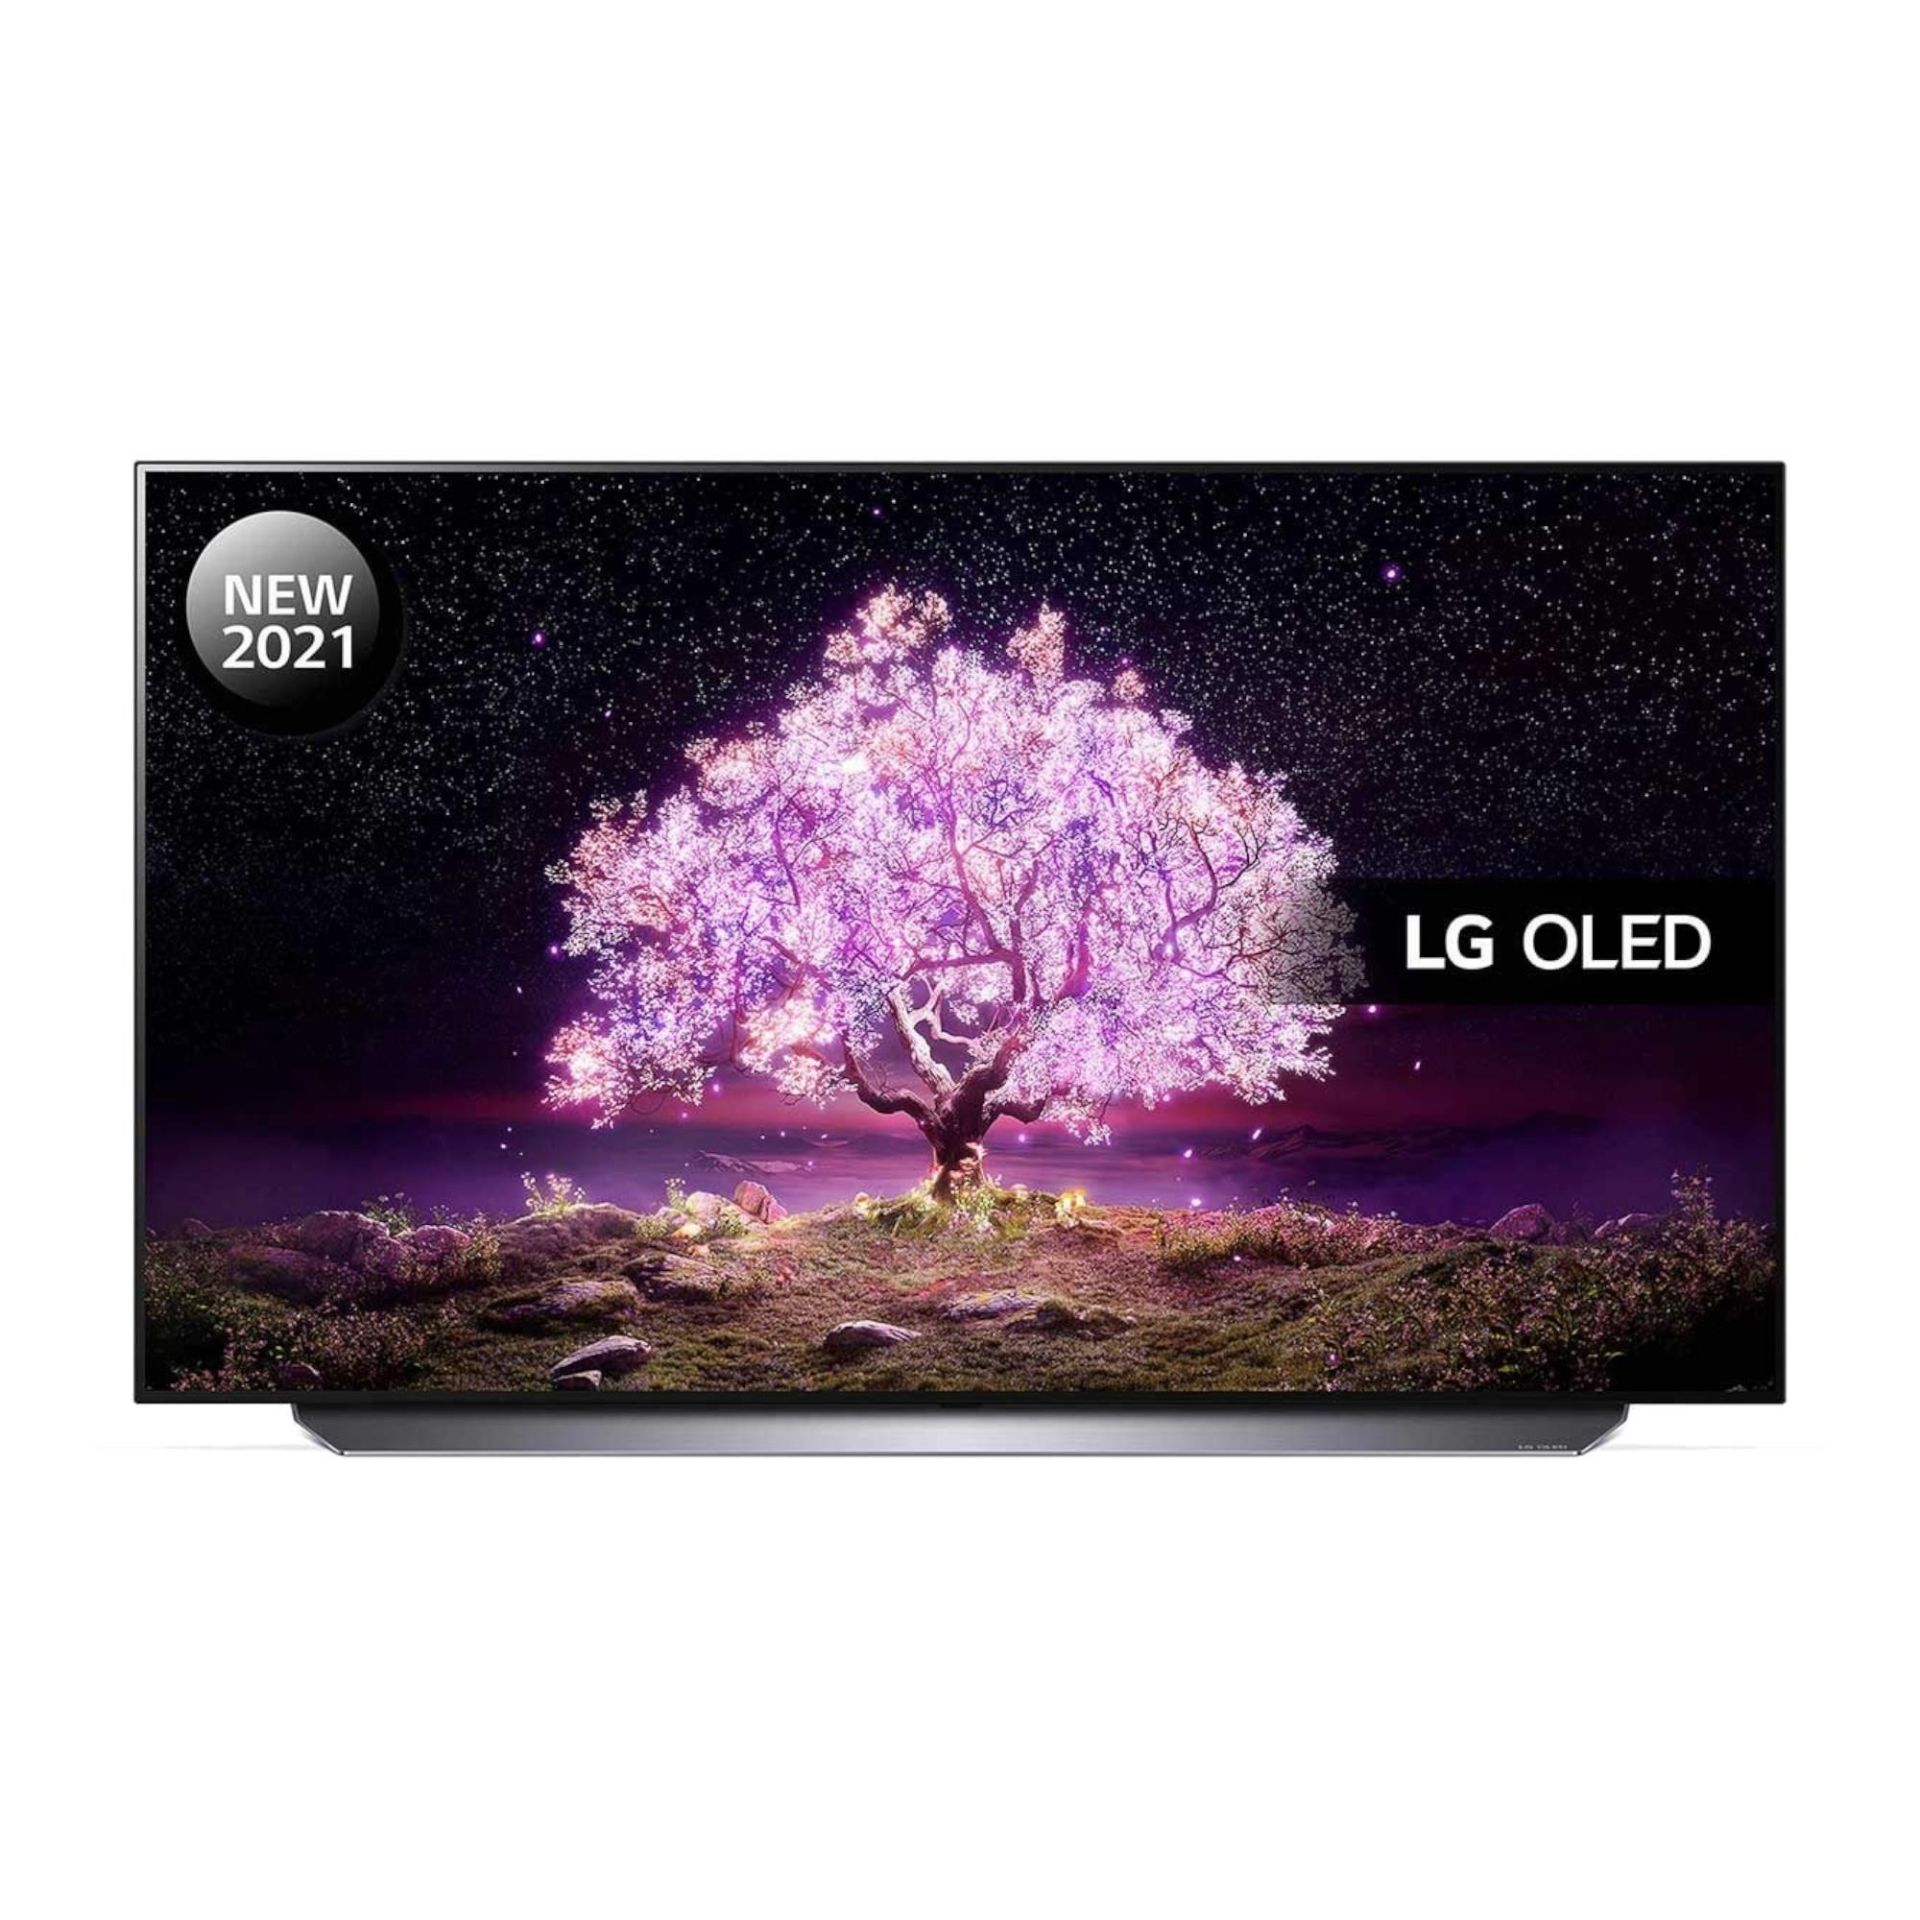 1 BOXED LG OLED55C14LB | 55 INCH OLED 4K ULTRA HD HDR SMART TV WITH STAND AND REMOTE RRP Â£999 (